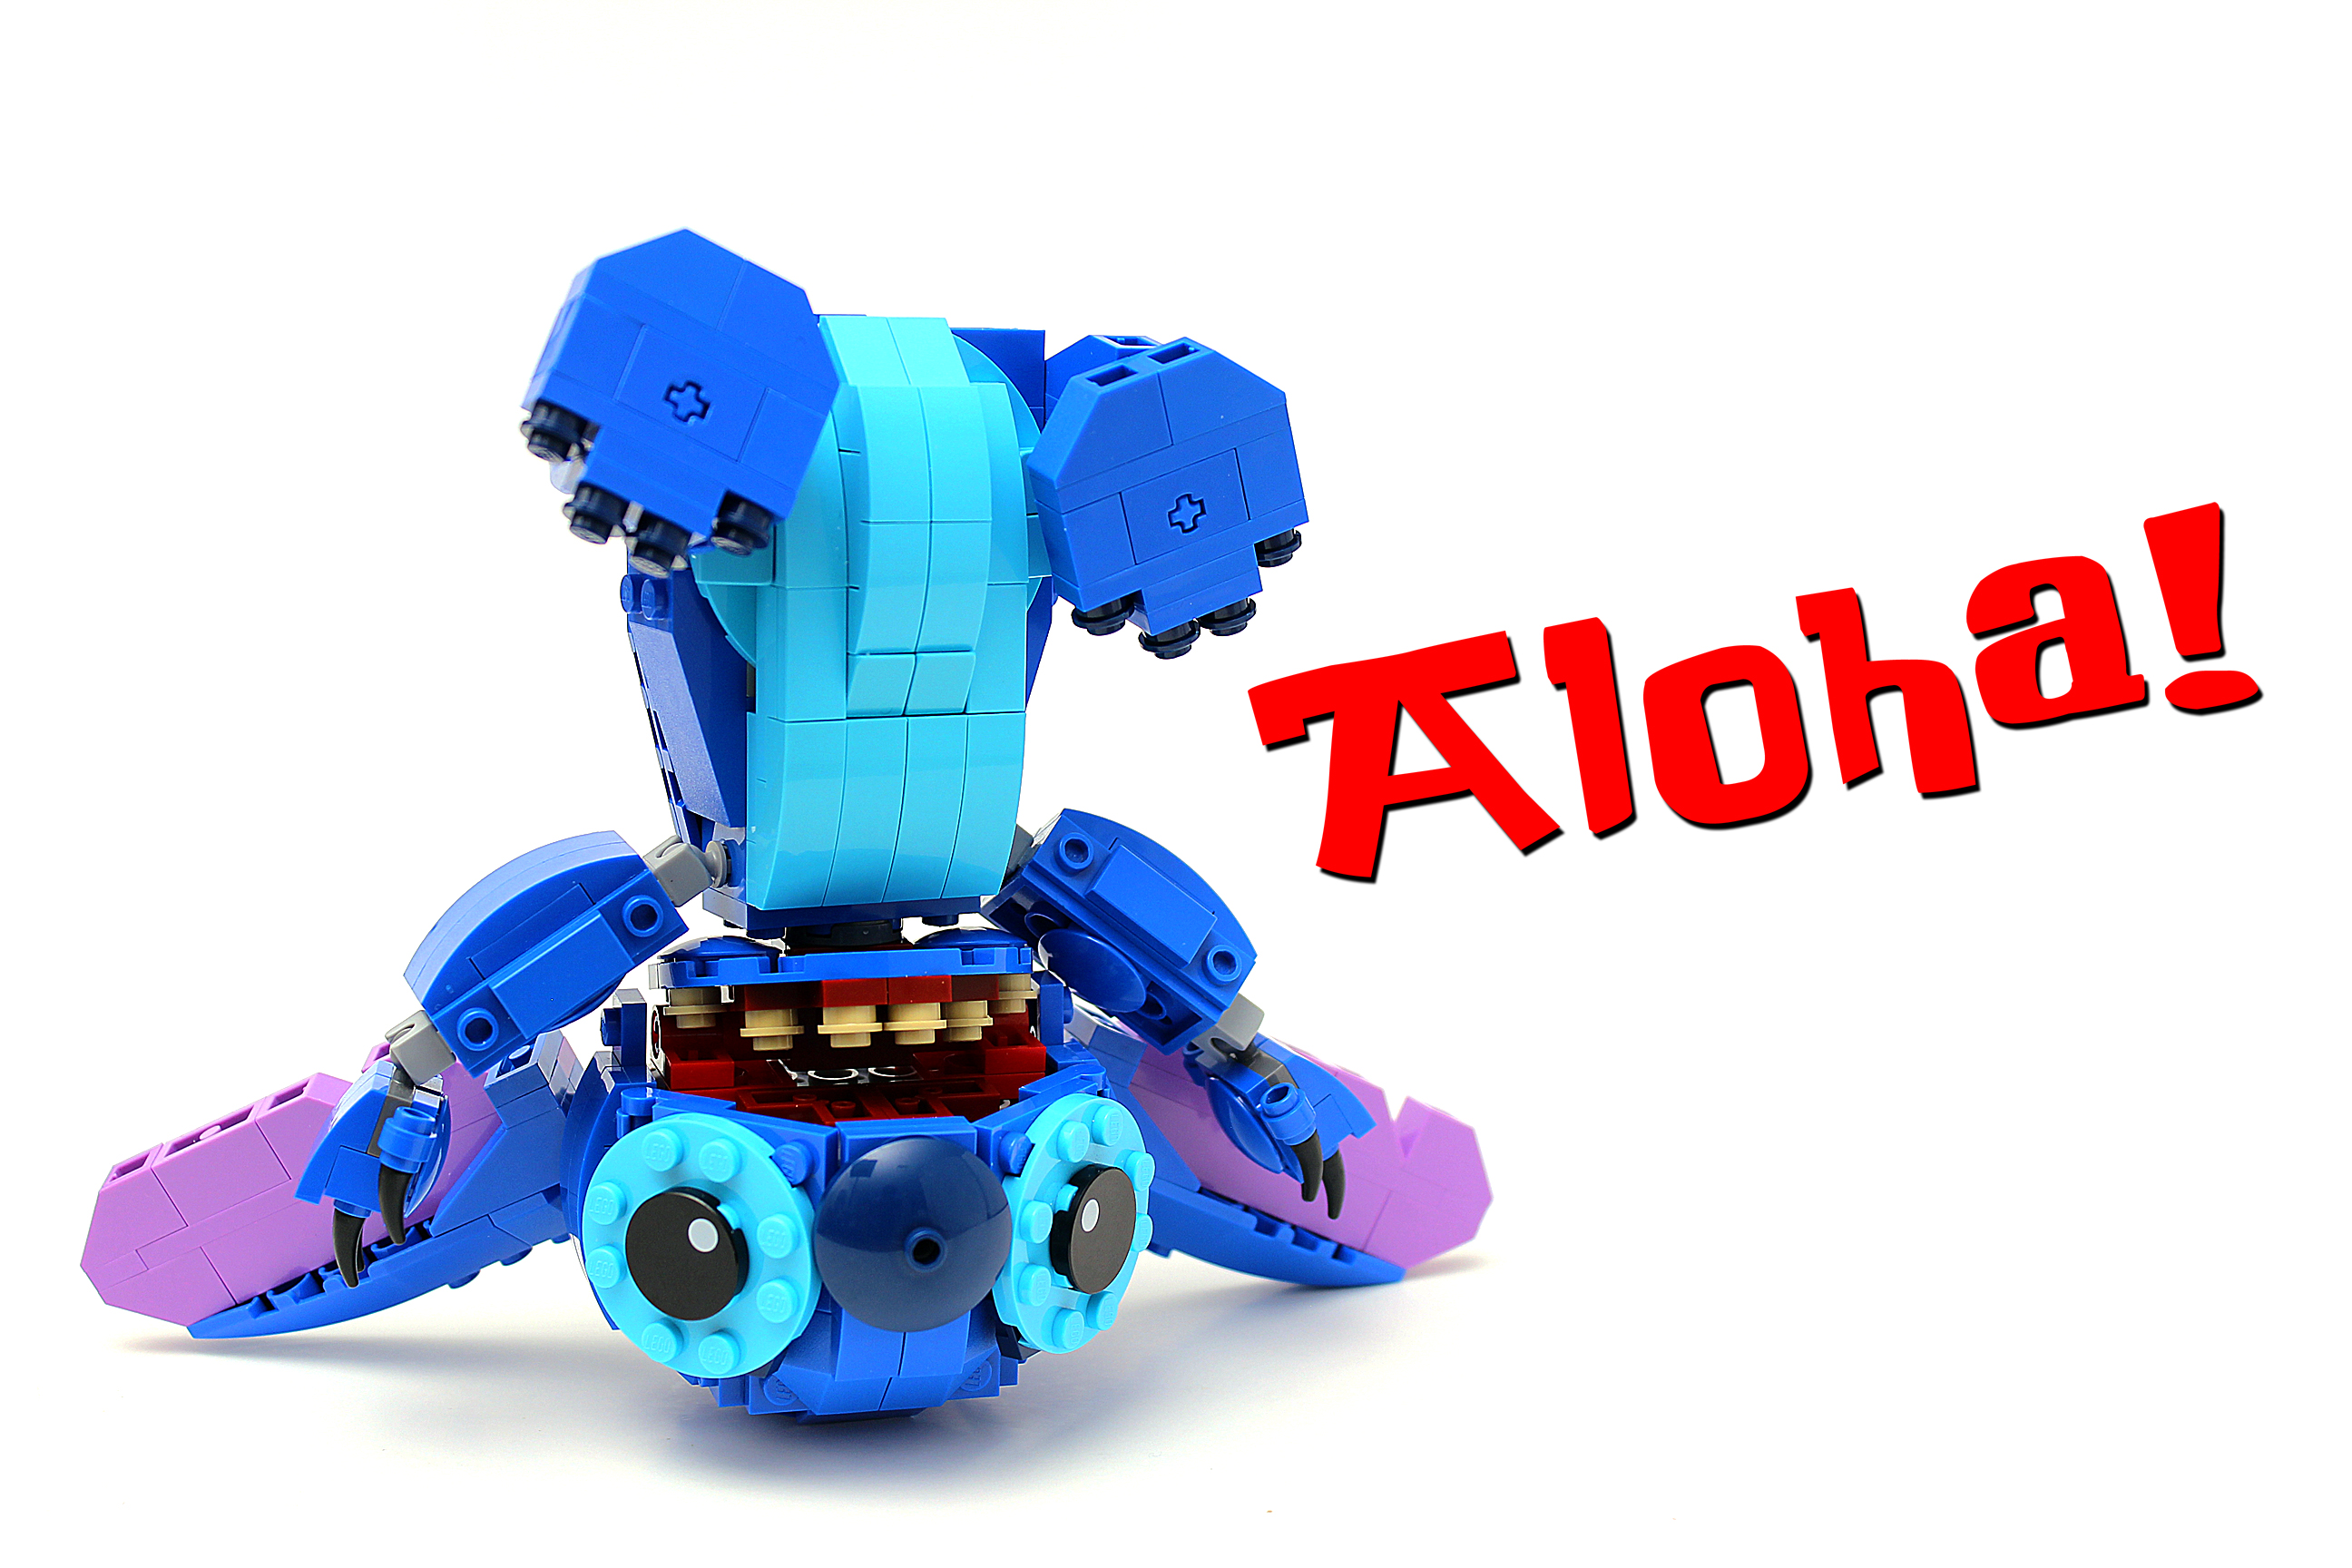 Vote Now For Disney “Stitch” LEGO Idea Set To Become A Reality